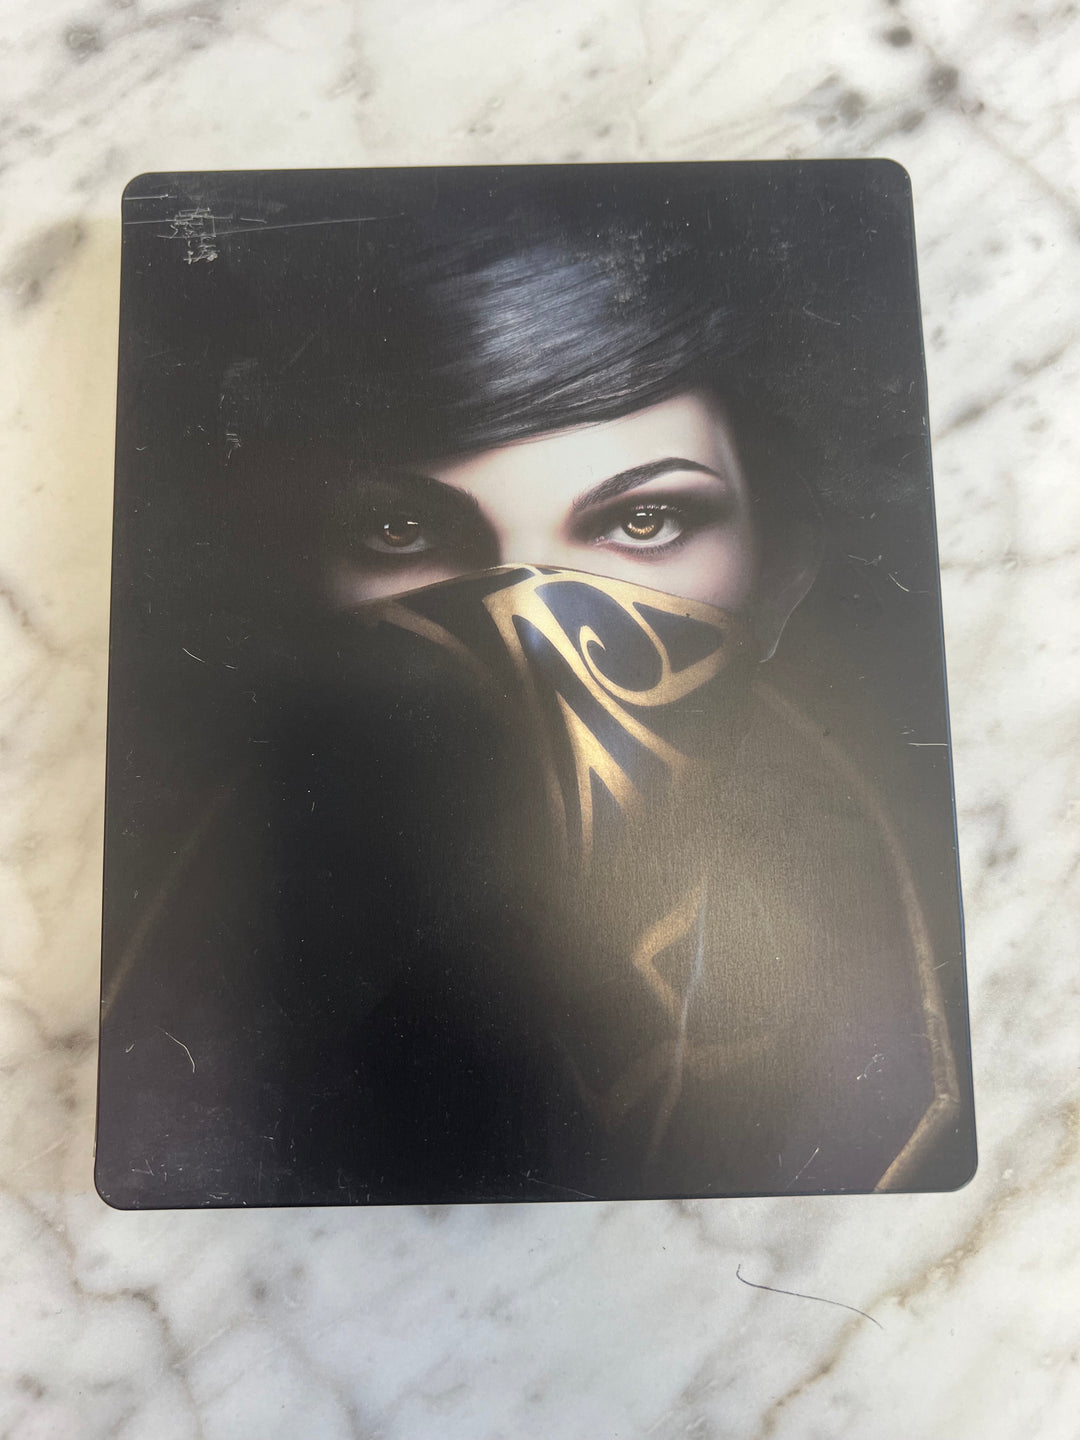 Dishonored Xbox One Steelbook Complete with Game    DO61624